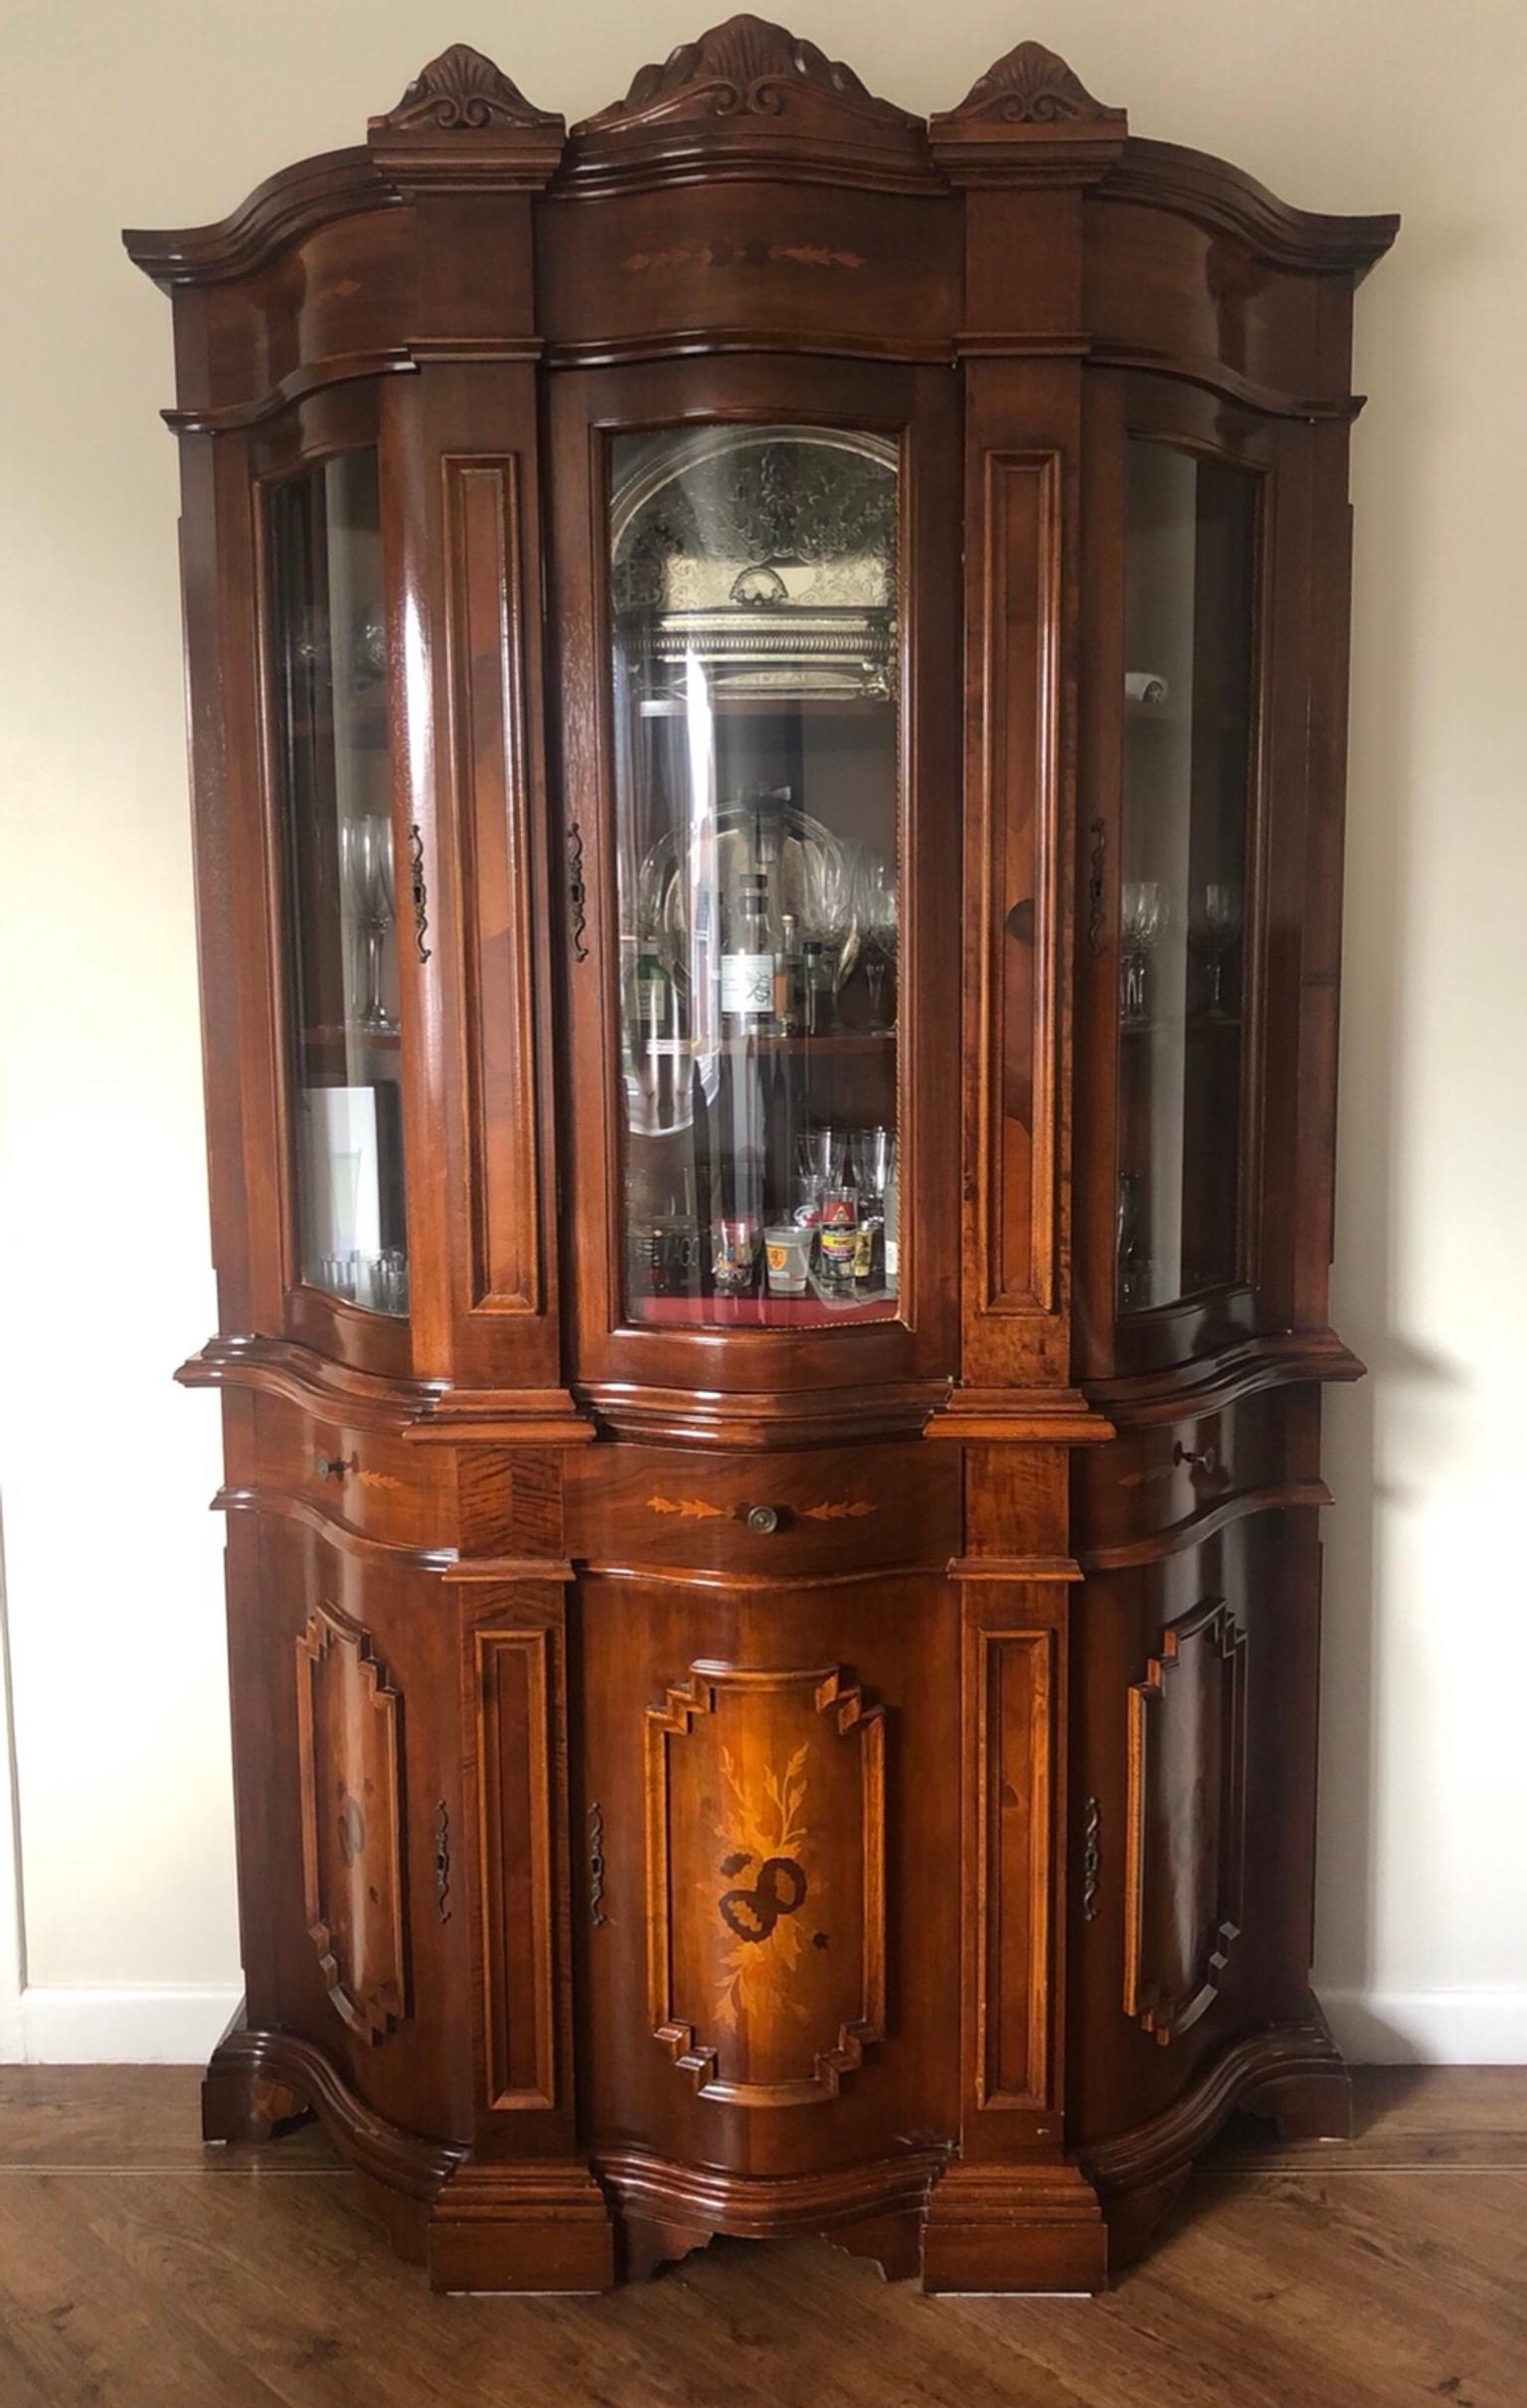 Italian Drinks Cabinet In B43 Walsall For 200 00 For Sale Shpock